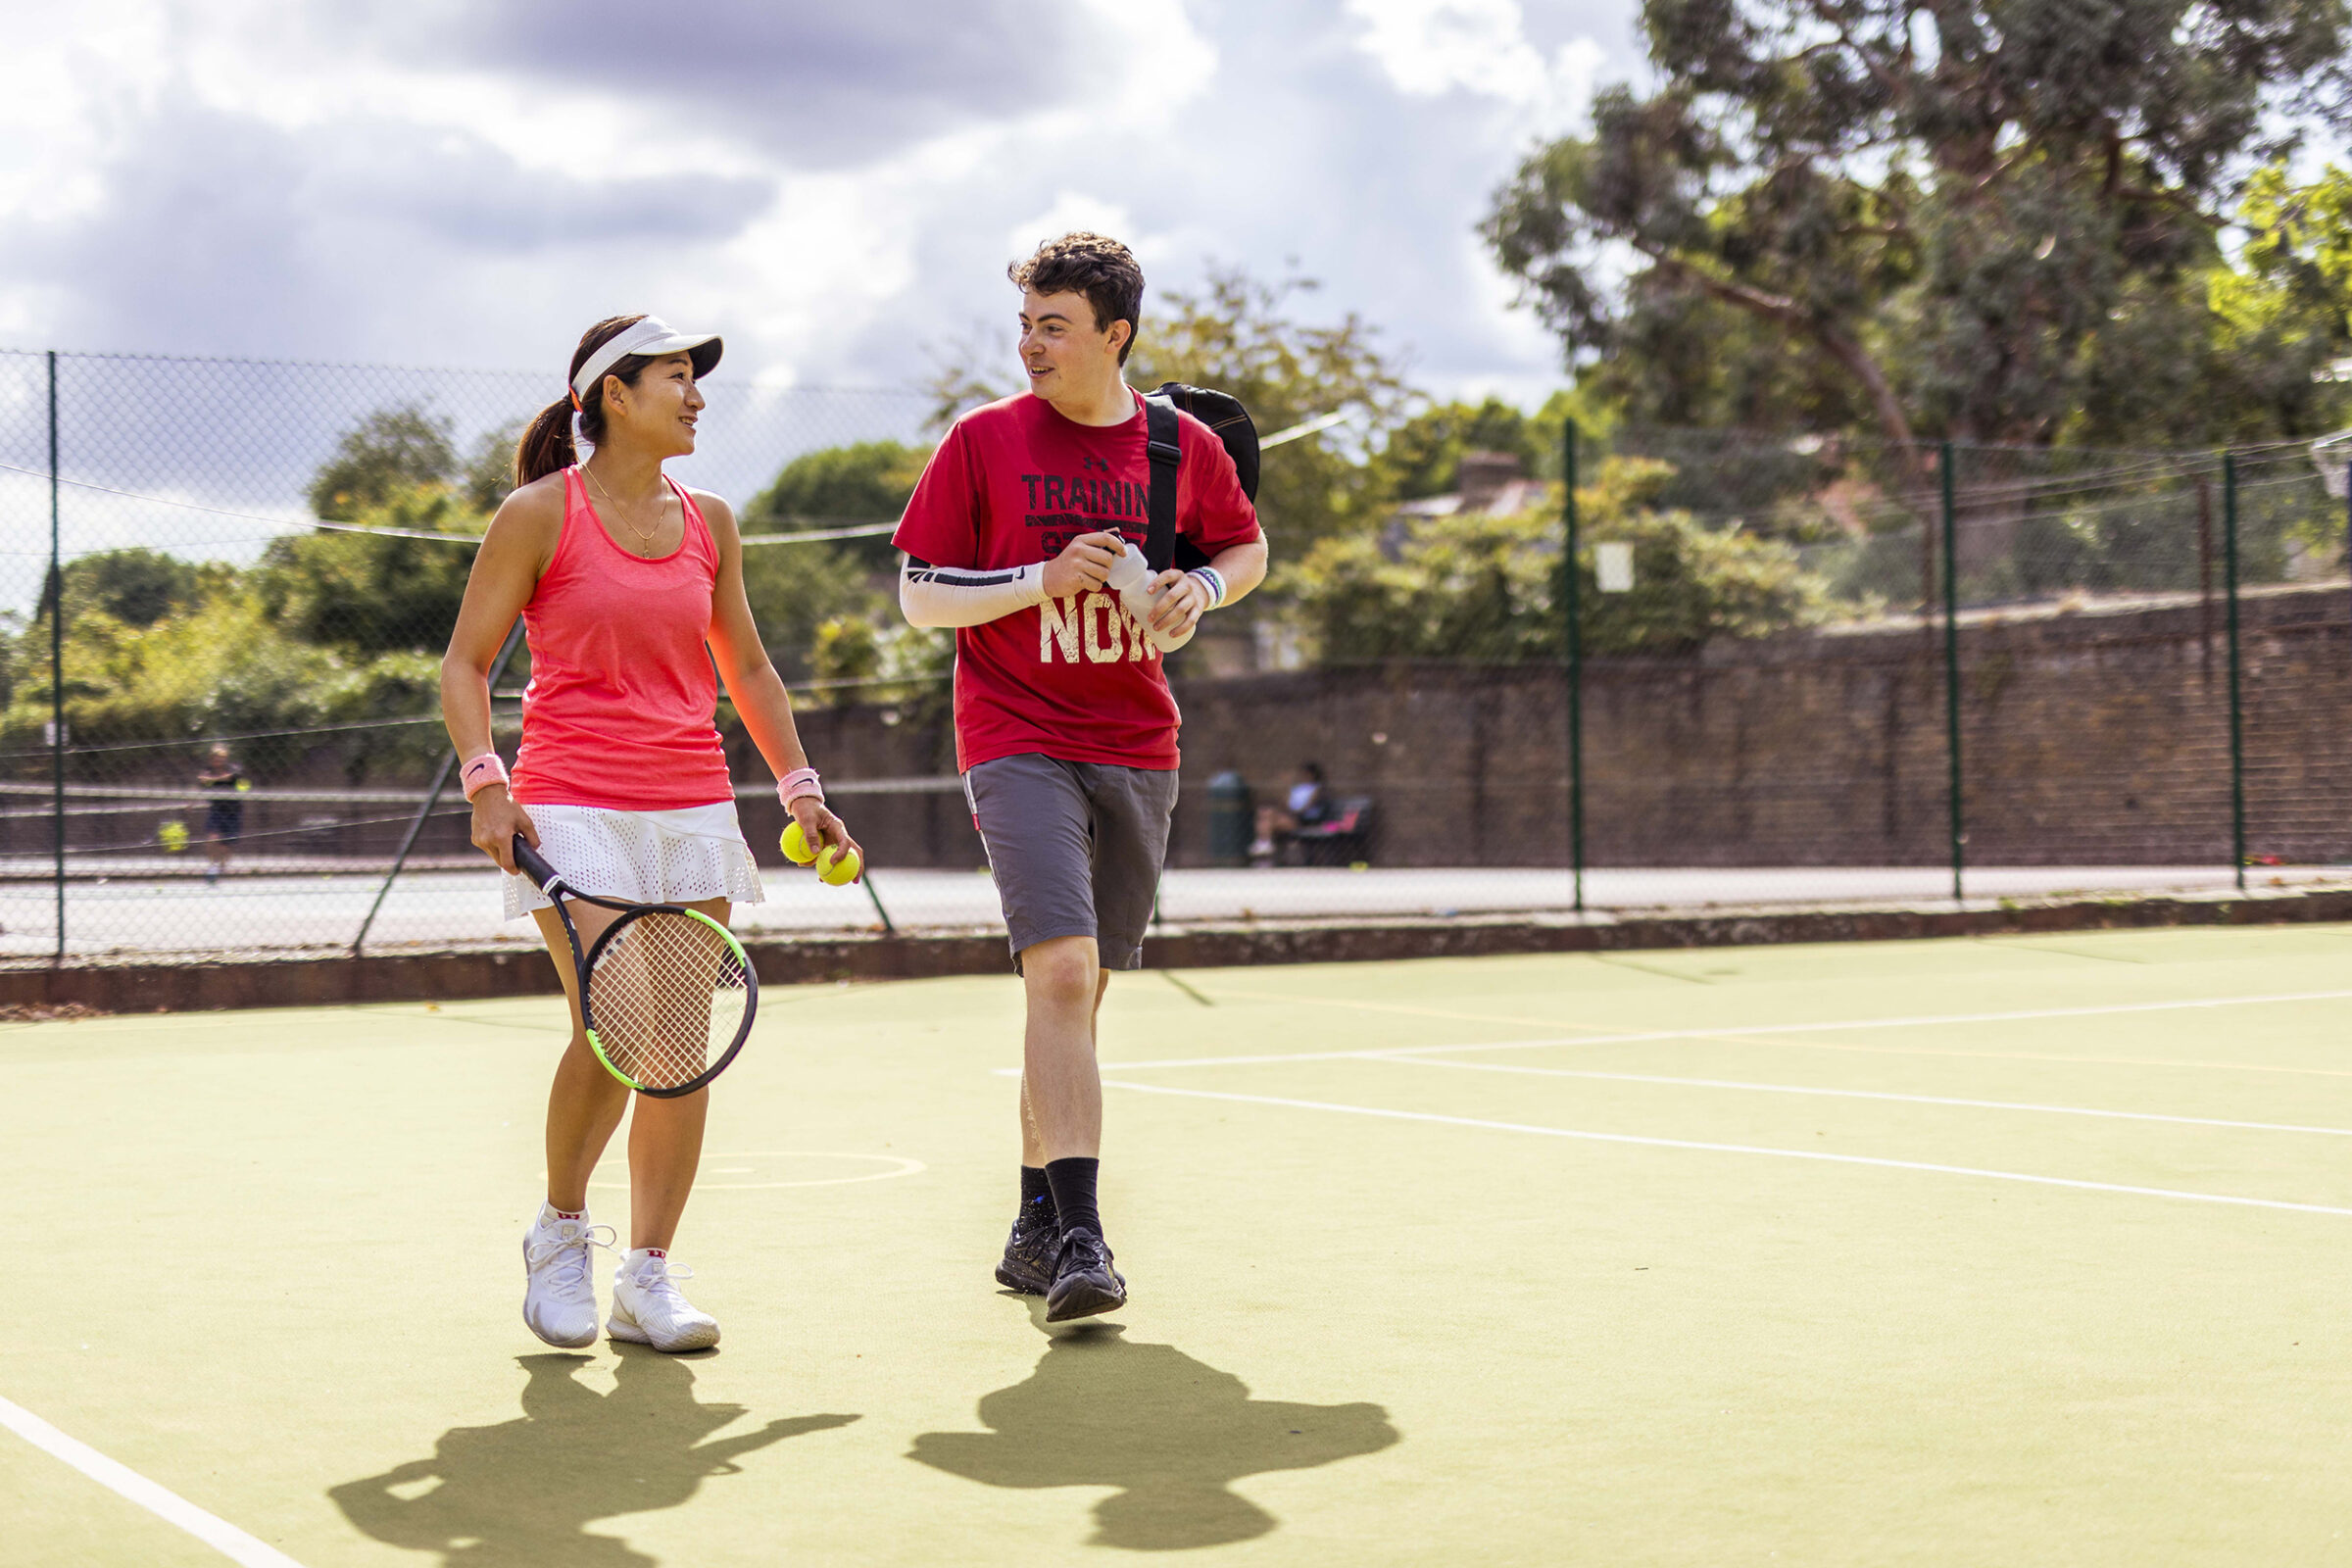 Paddle tennis: characteristics of a dynamic sport full of enthusiasm